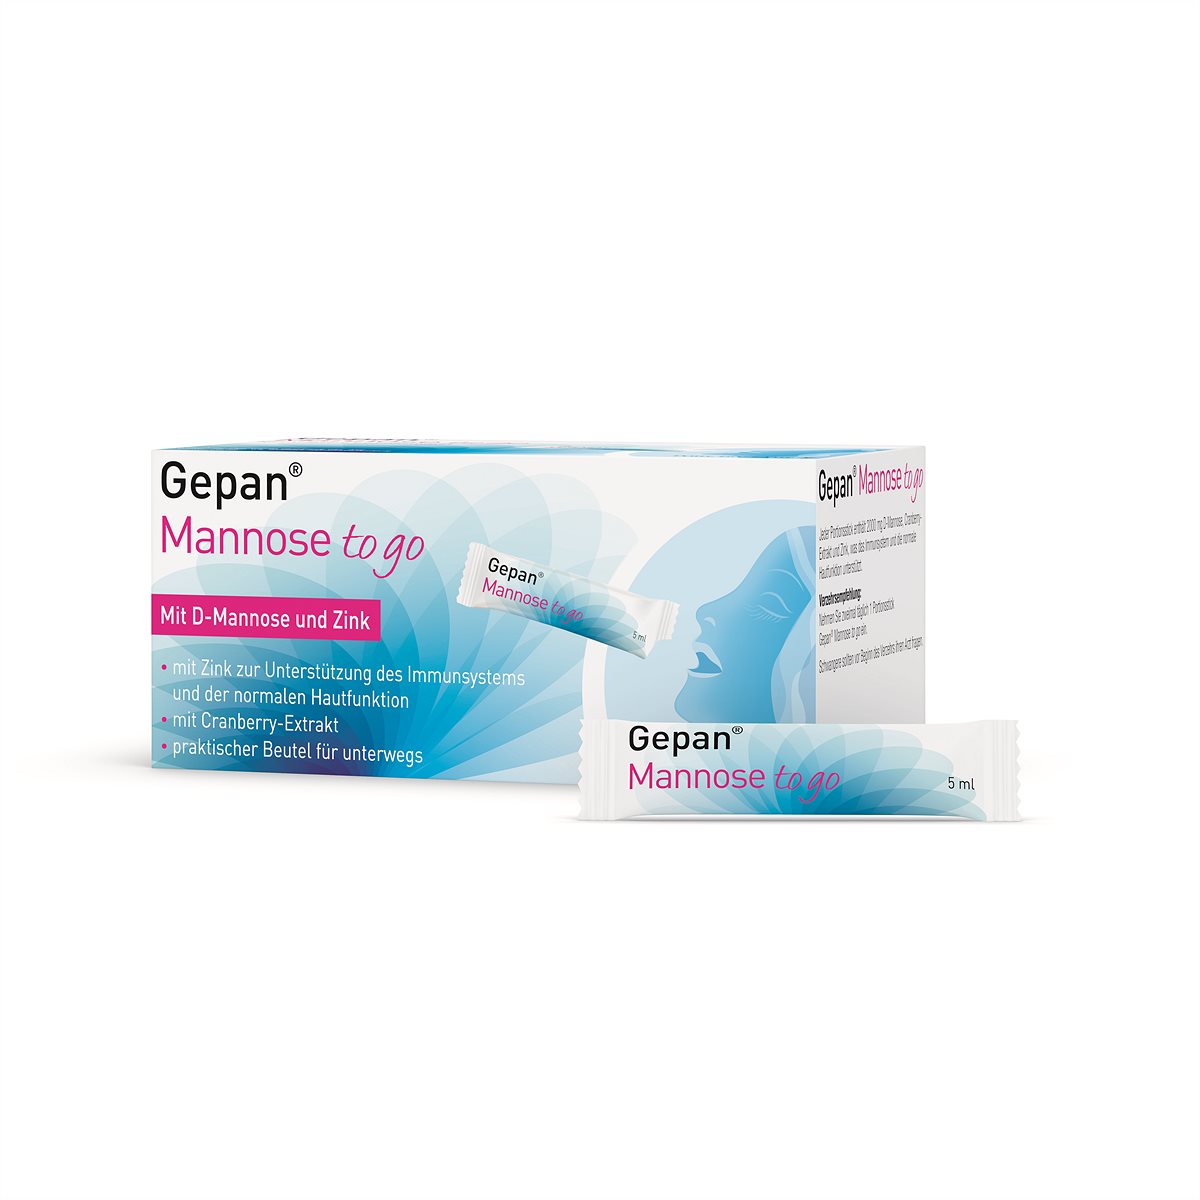 Gepan® Mannose to go (. jpg )